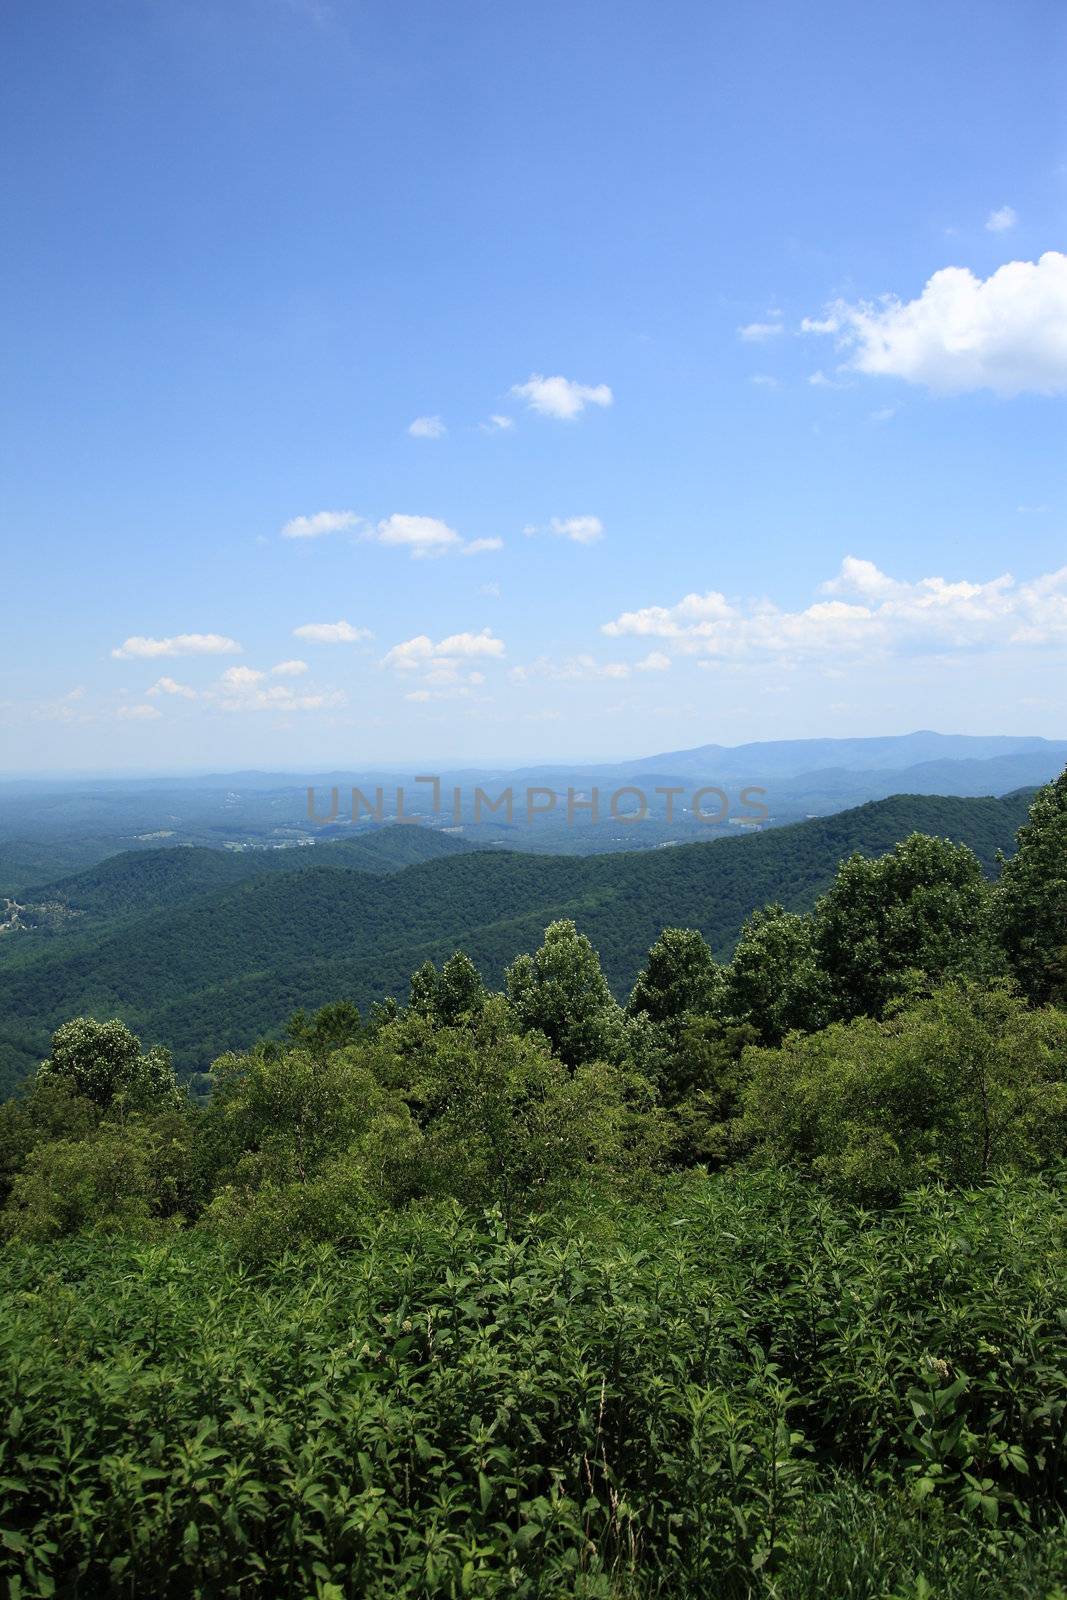 Summertime view from scenic Blue Ridge Parkway.